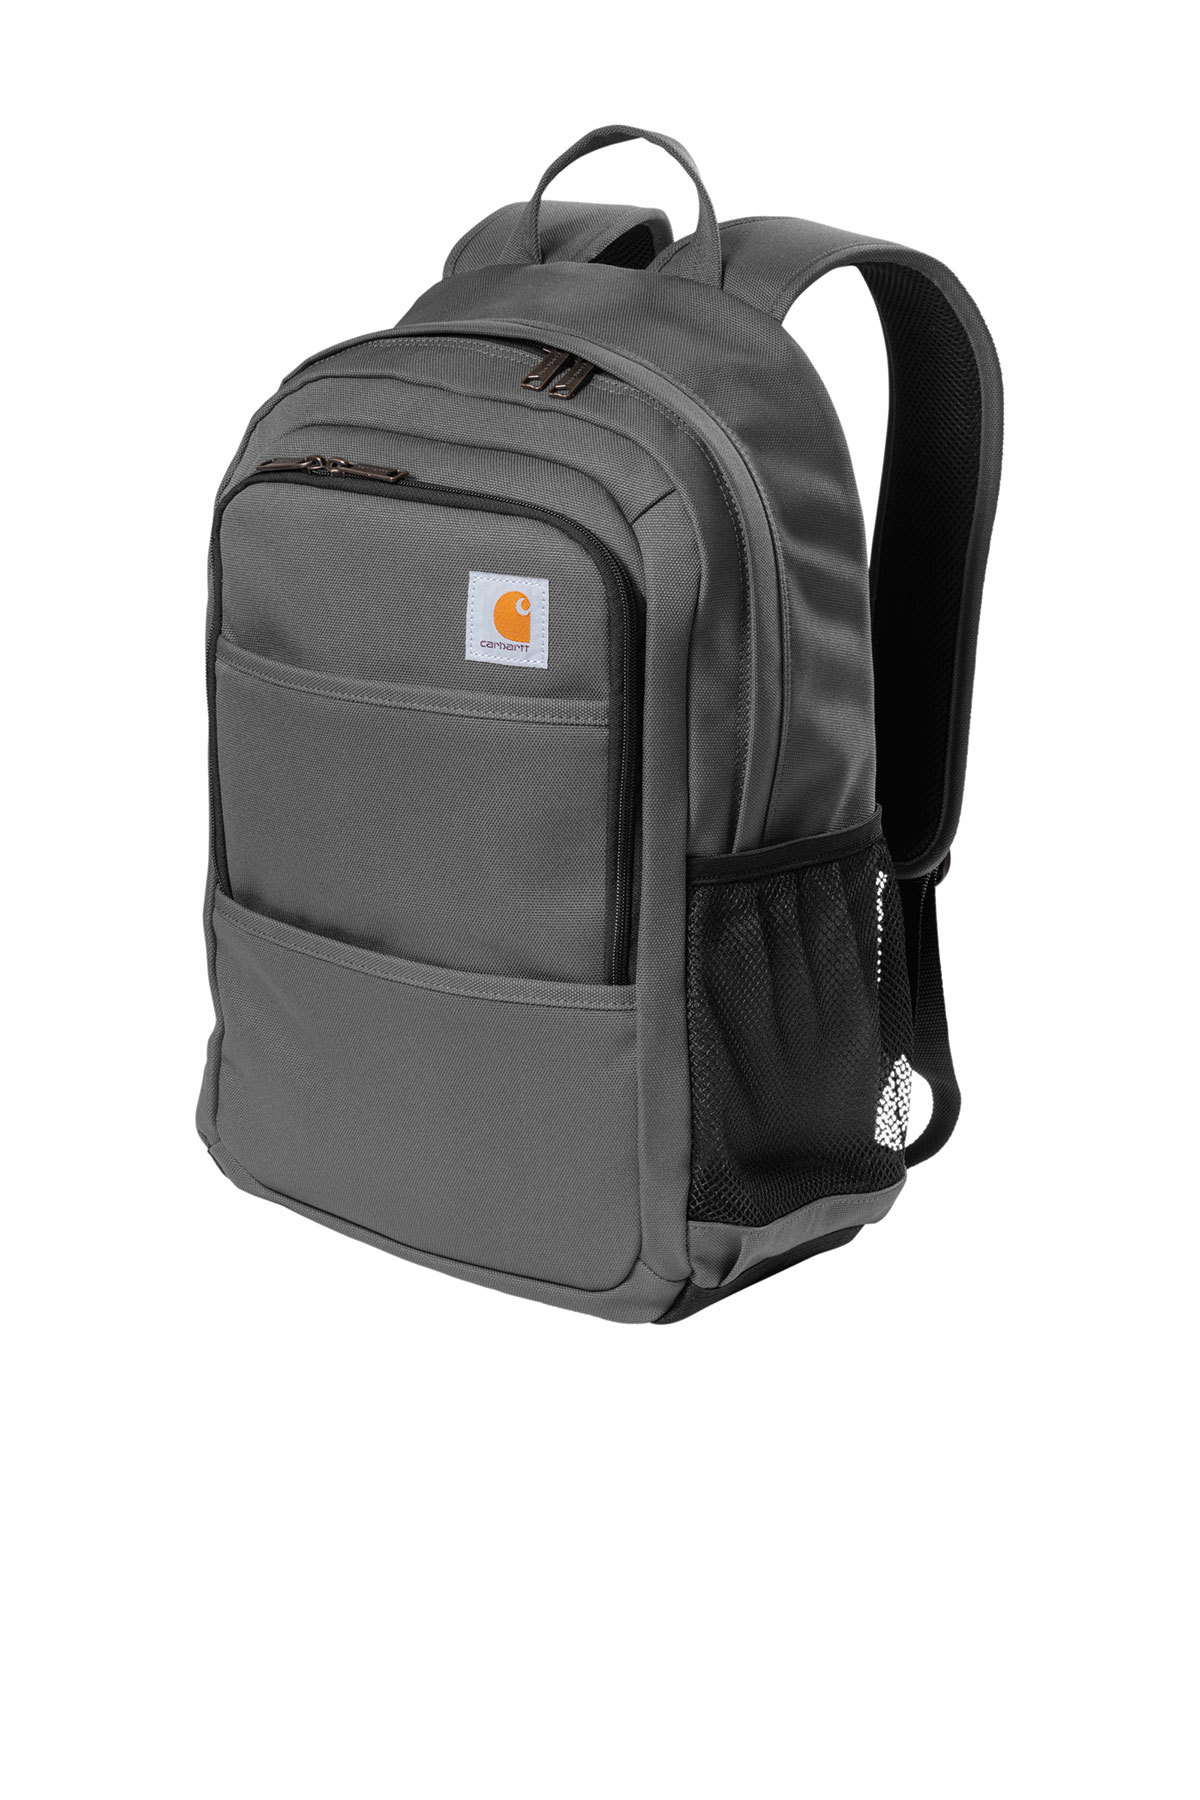 Carhartt Foundry Series Backpack | Product | SanMar